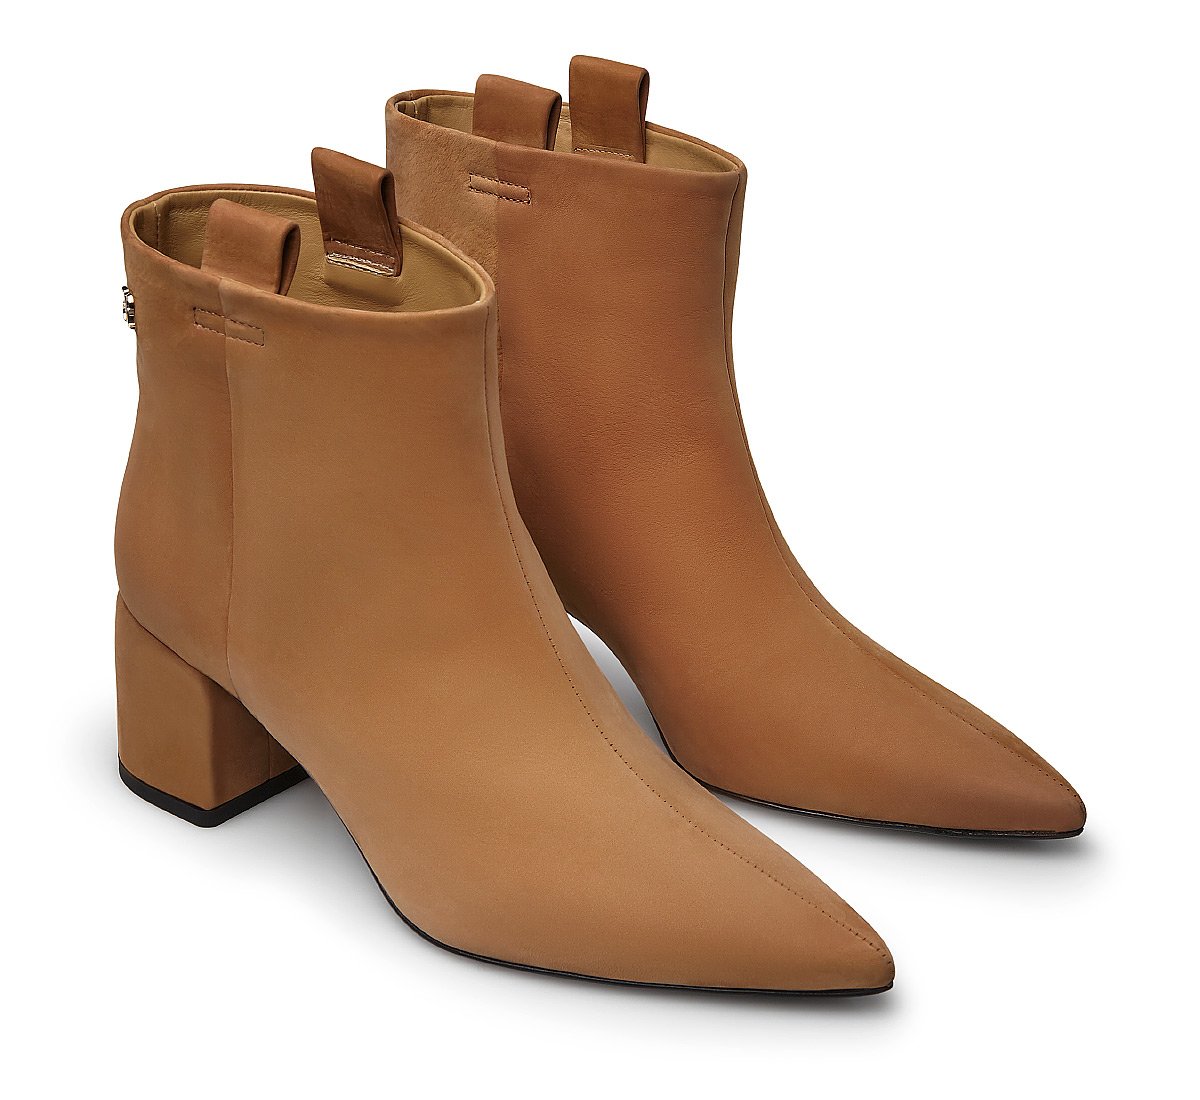 Mid-calf boot in suede